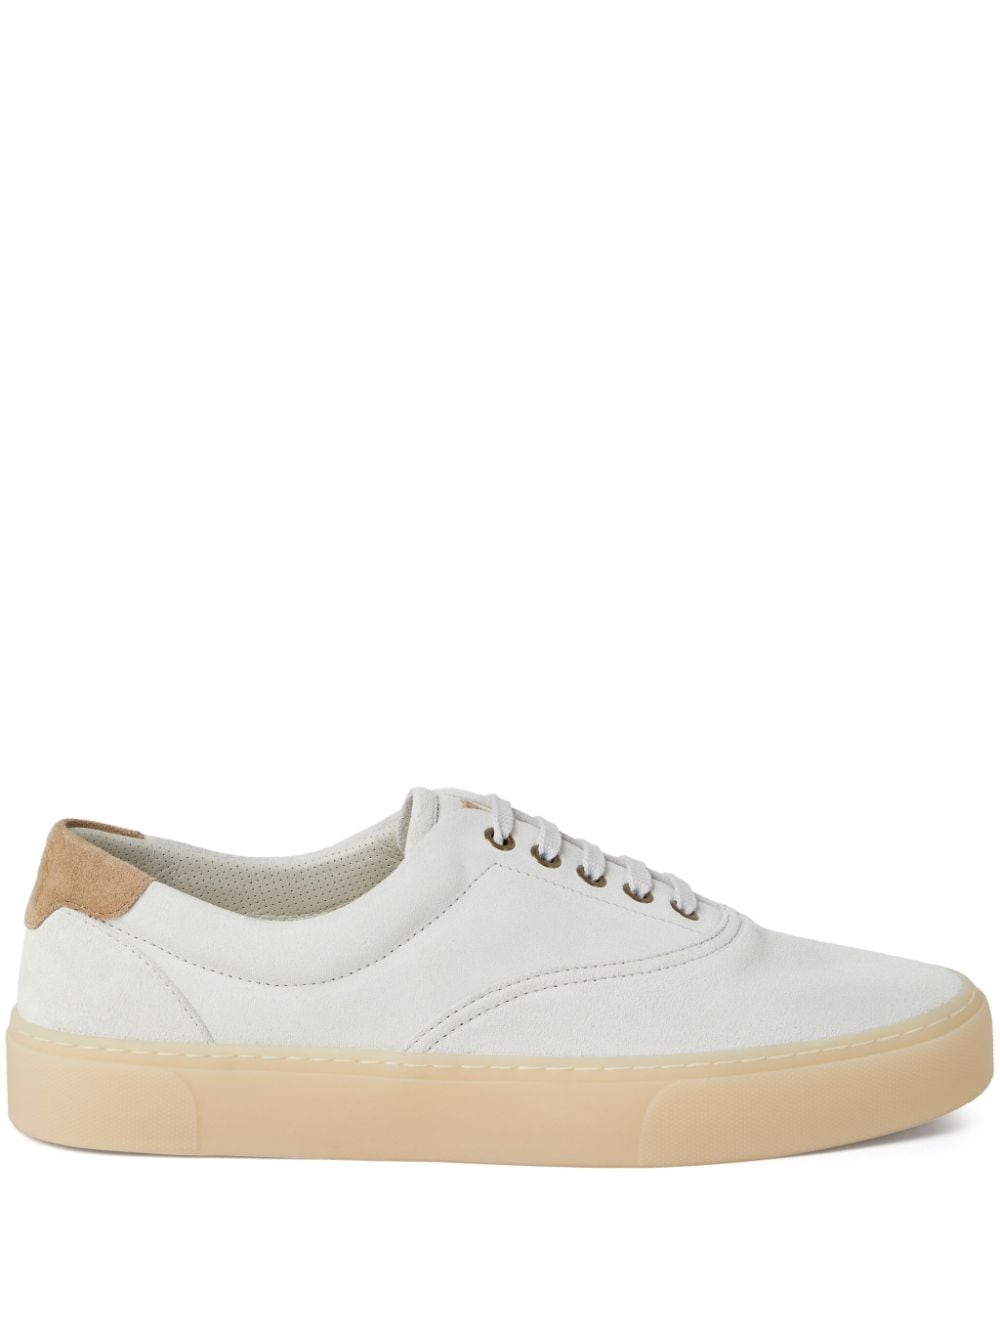 Image 1 of Brunello Cucinelli low-top suede sneakers